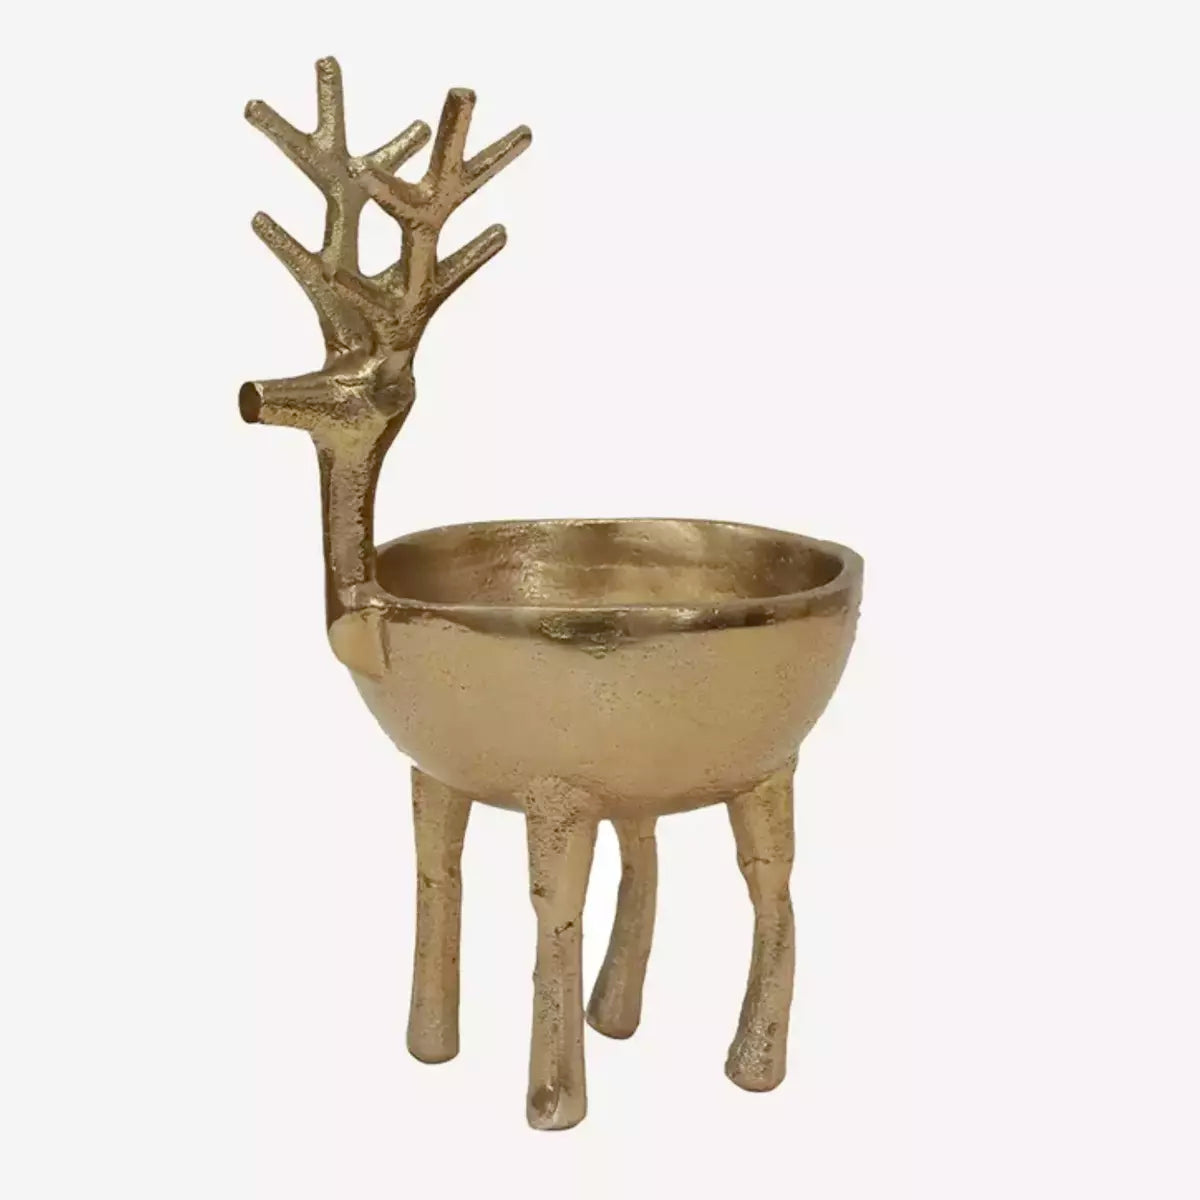 A French Country Collections Reindeer Sweets Bowl - Gold - Large on a white background.